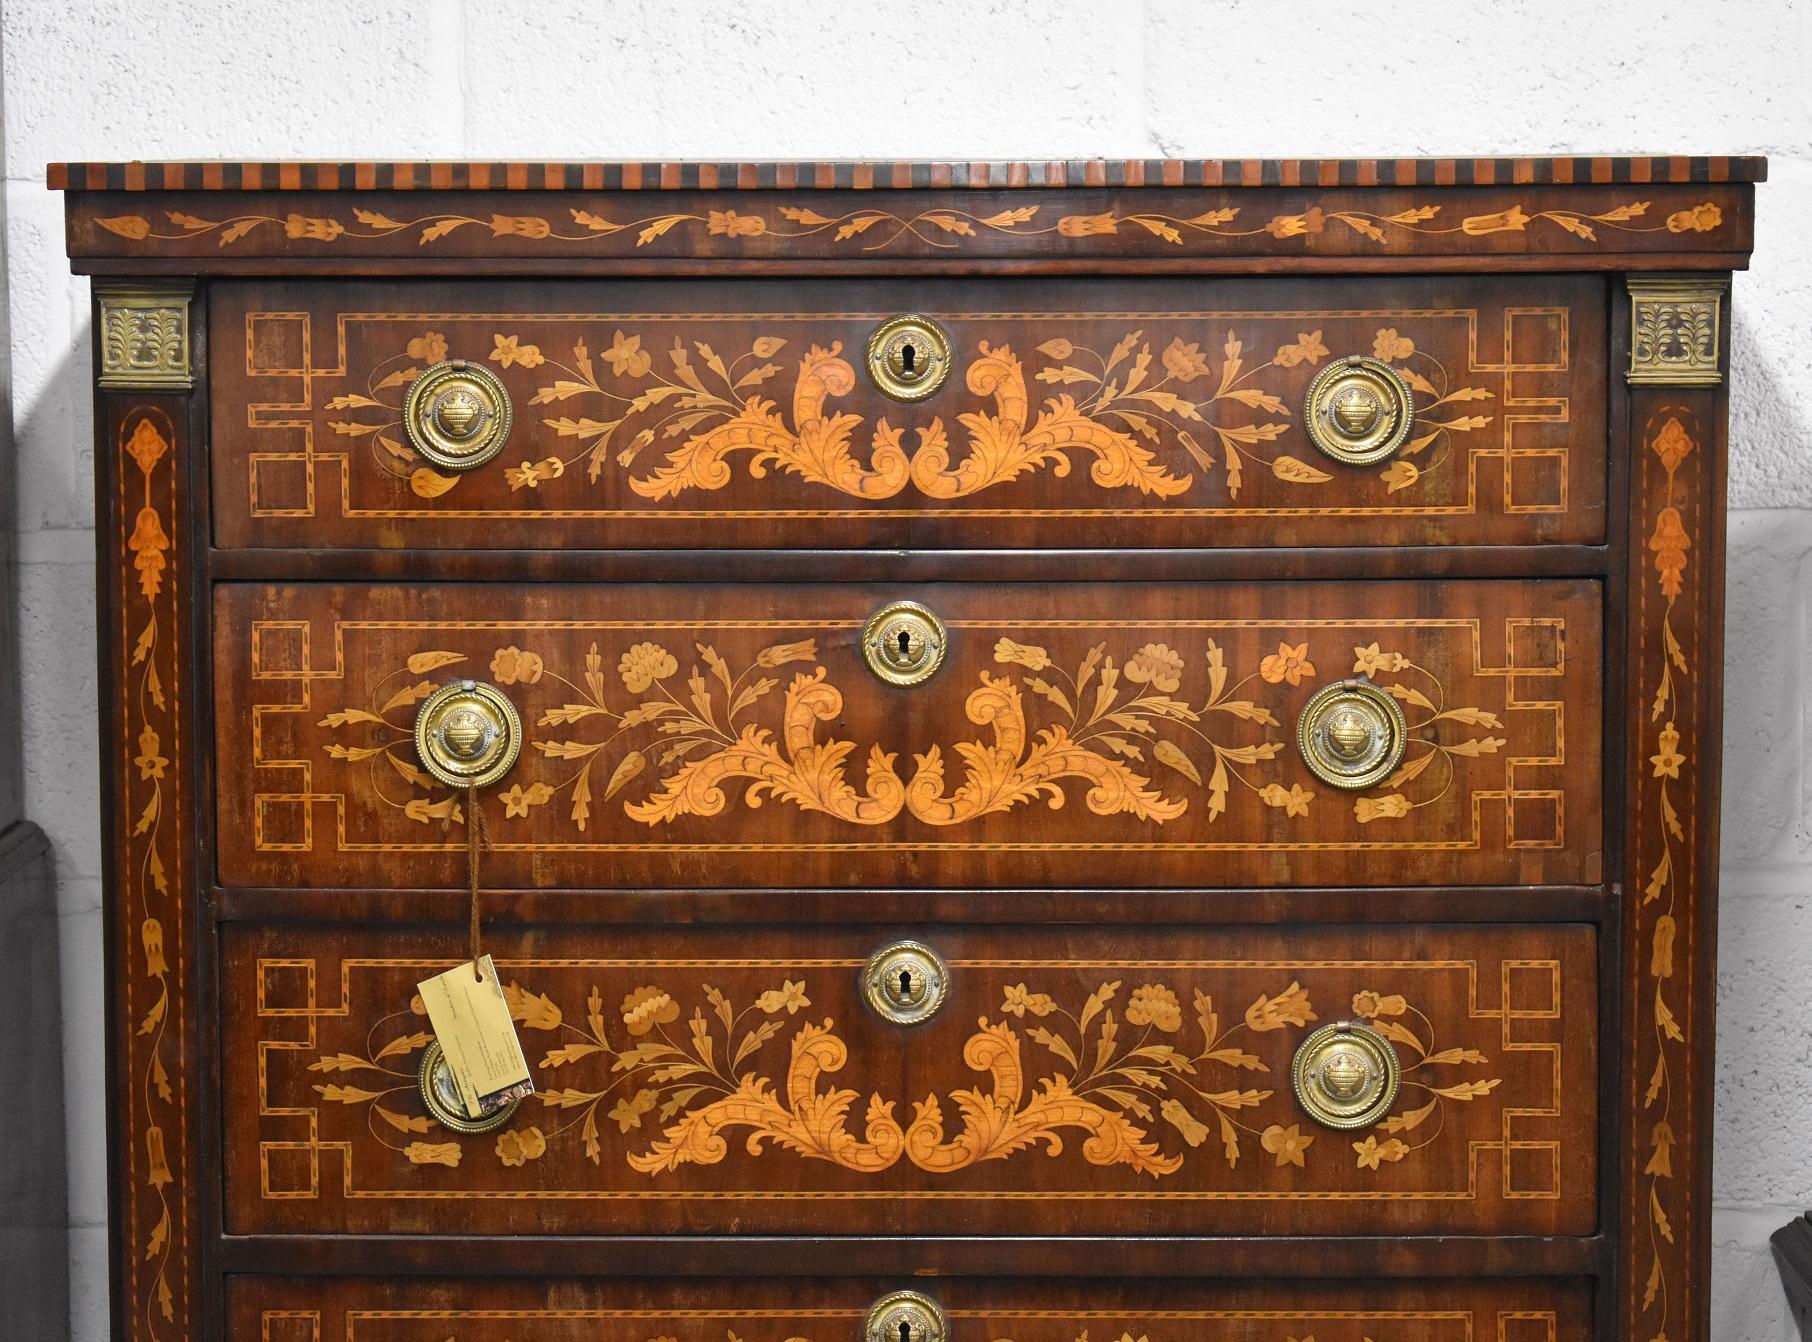 For sale is a good 18th Century Dutch Marquetry Chest of Drawers. The chest has six drawers profusely inlaid and each with brass ring handles. The sides of the chest are also intricately inlaid, standing on small feet this piece is in very good